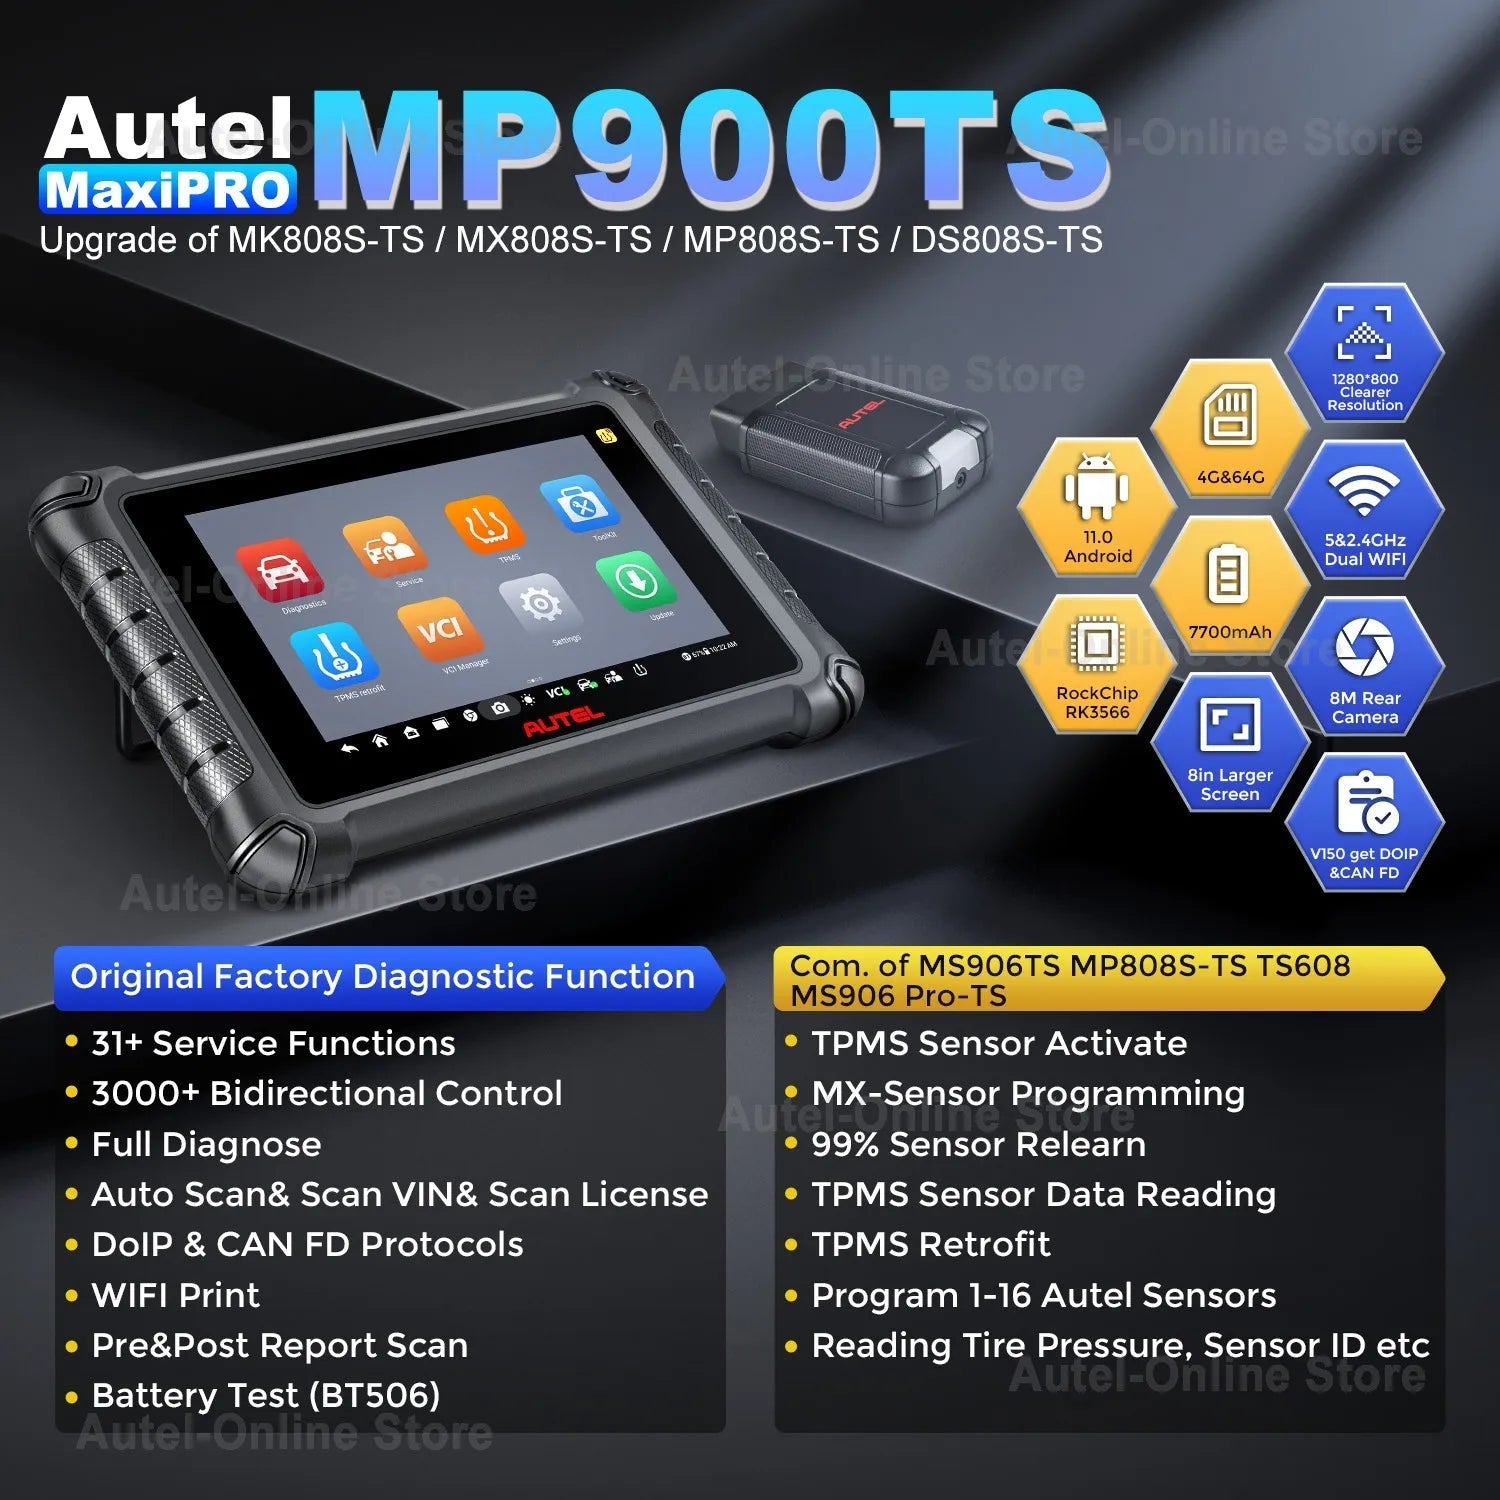 Autel MaxiPRO MP900TS Diagnostic Tool, Full System Bidirectional & Functional Tests Scan Tool, Work with CAN FD / DoIP vehicles - Dynamex